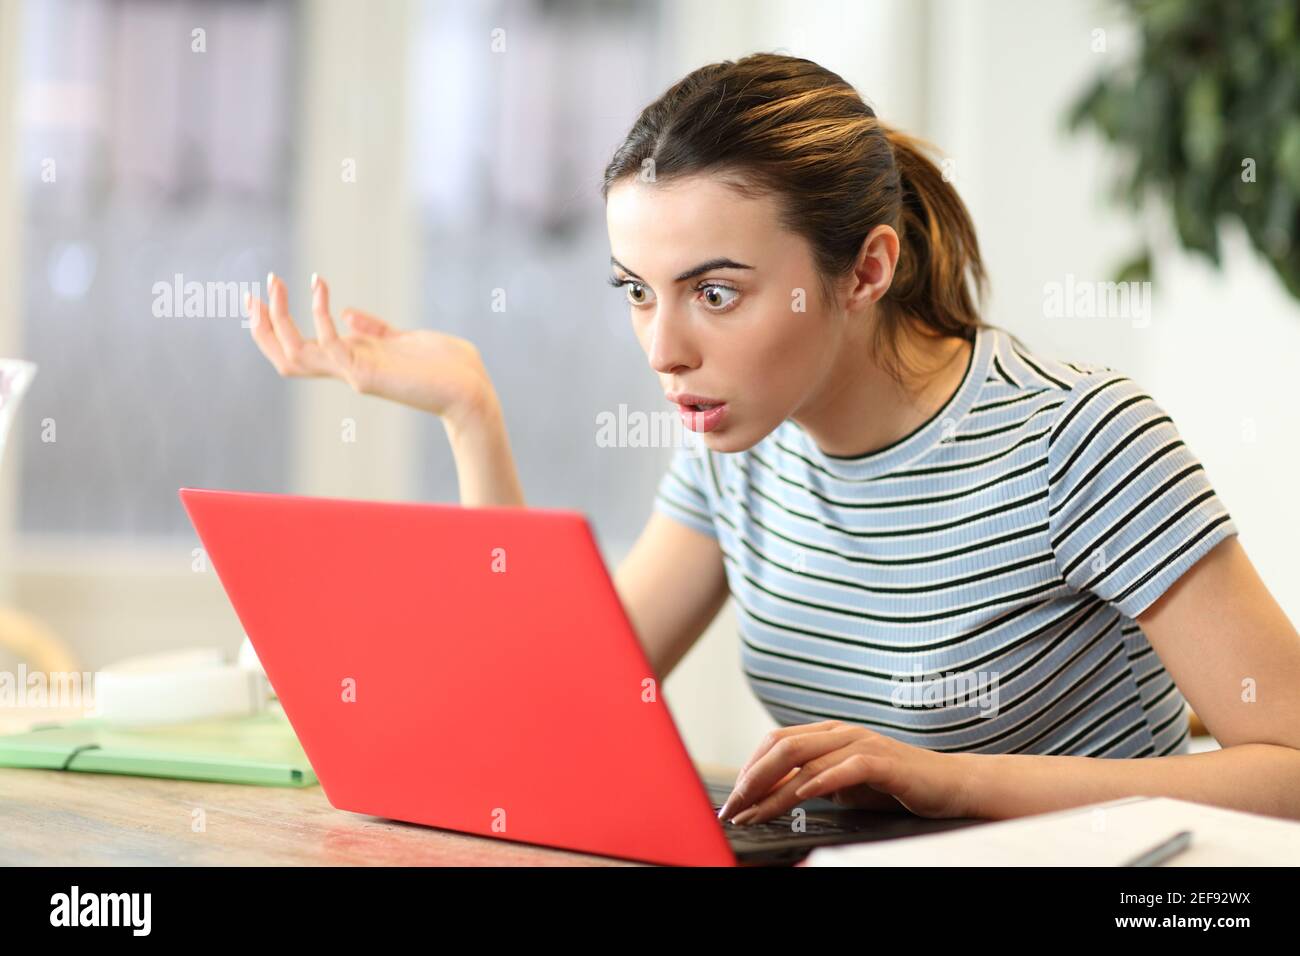 Stunned student watching laptop content complaining at home Stock Photo